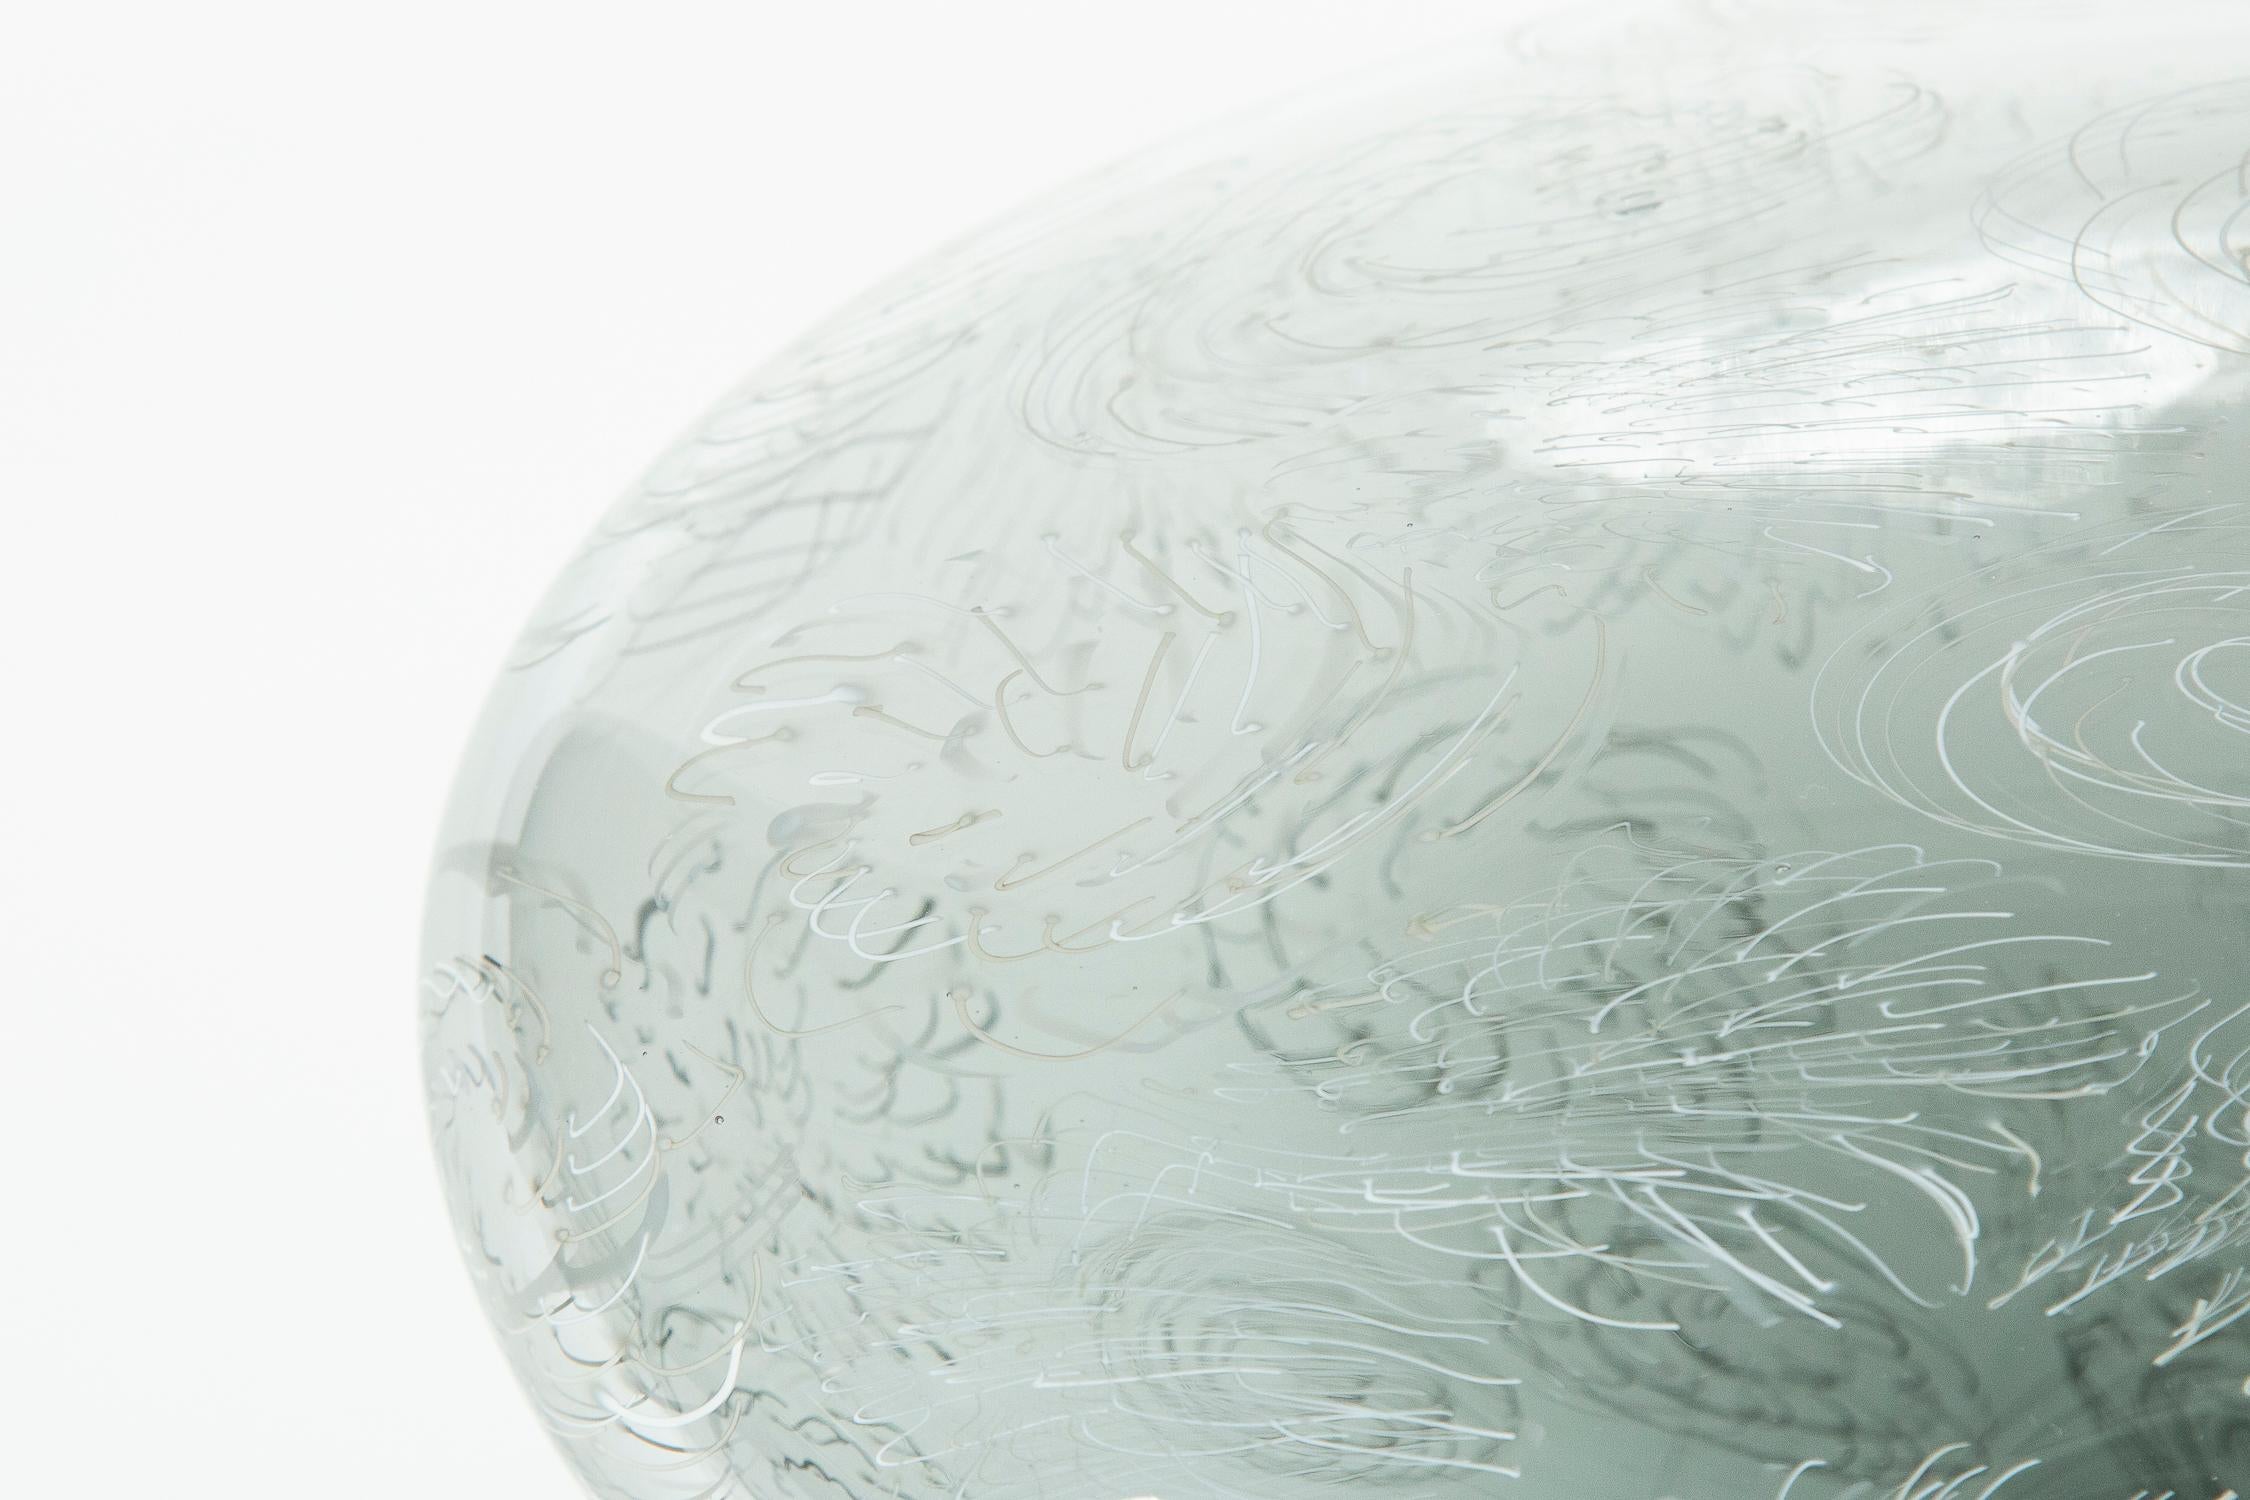 Hand-Crafted Stone IV, a unique grey and white Glass blown Sculpture by Ann Wåhlström